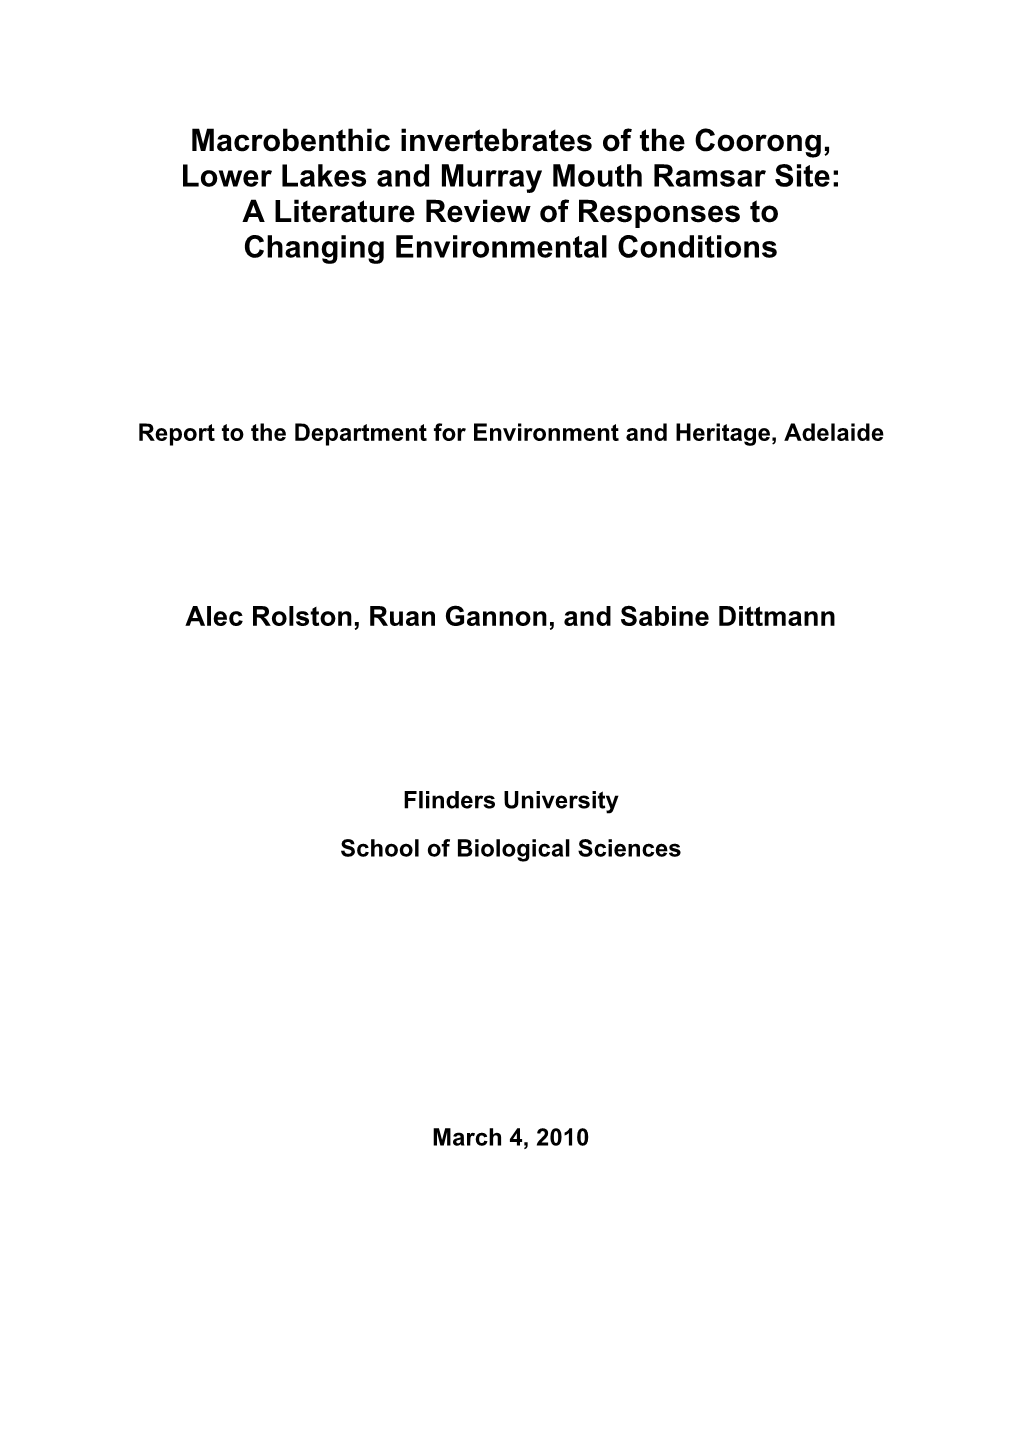 Macrobenthic Invertebrates of the Coorong, Lower Lakes and Murray Mouth Ramsar Site: a Literature Review of Responses to Changing Environmental Conditions